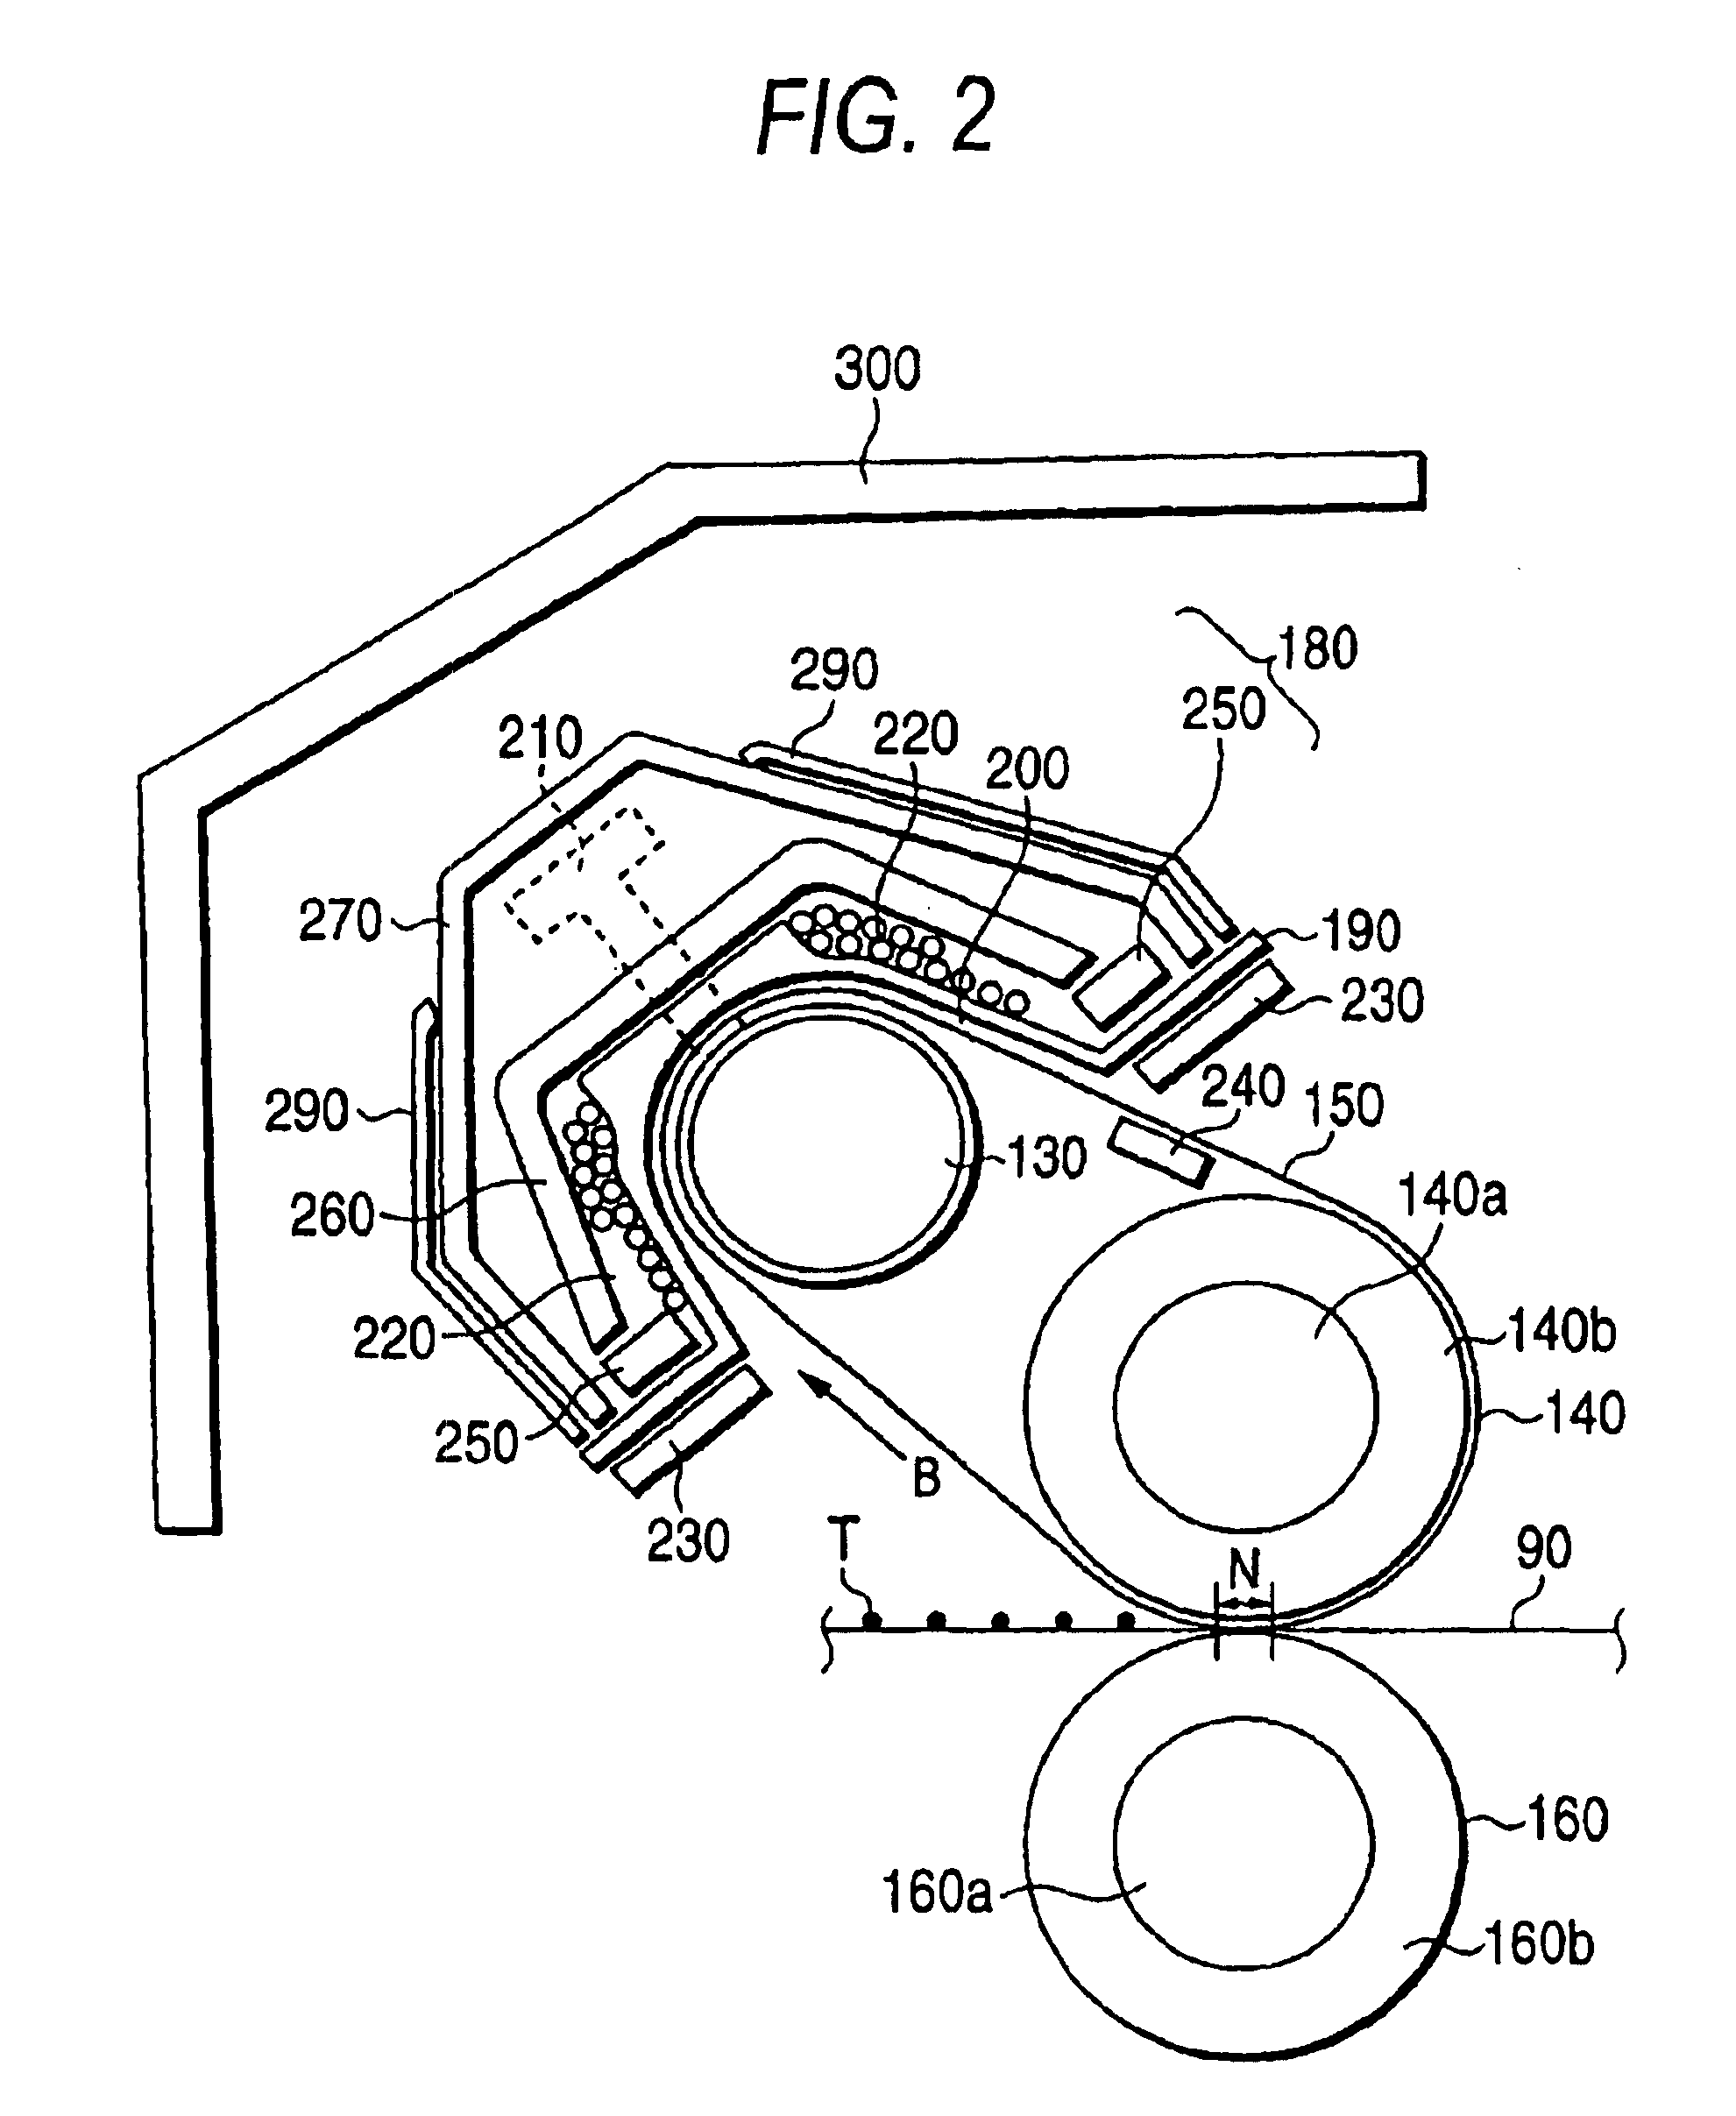 Heating device and fuser utilizing electromagnetic induction